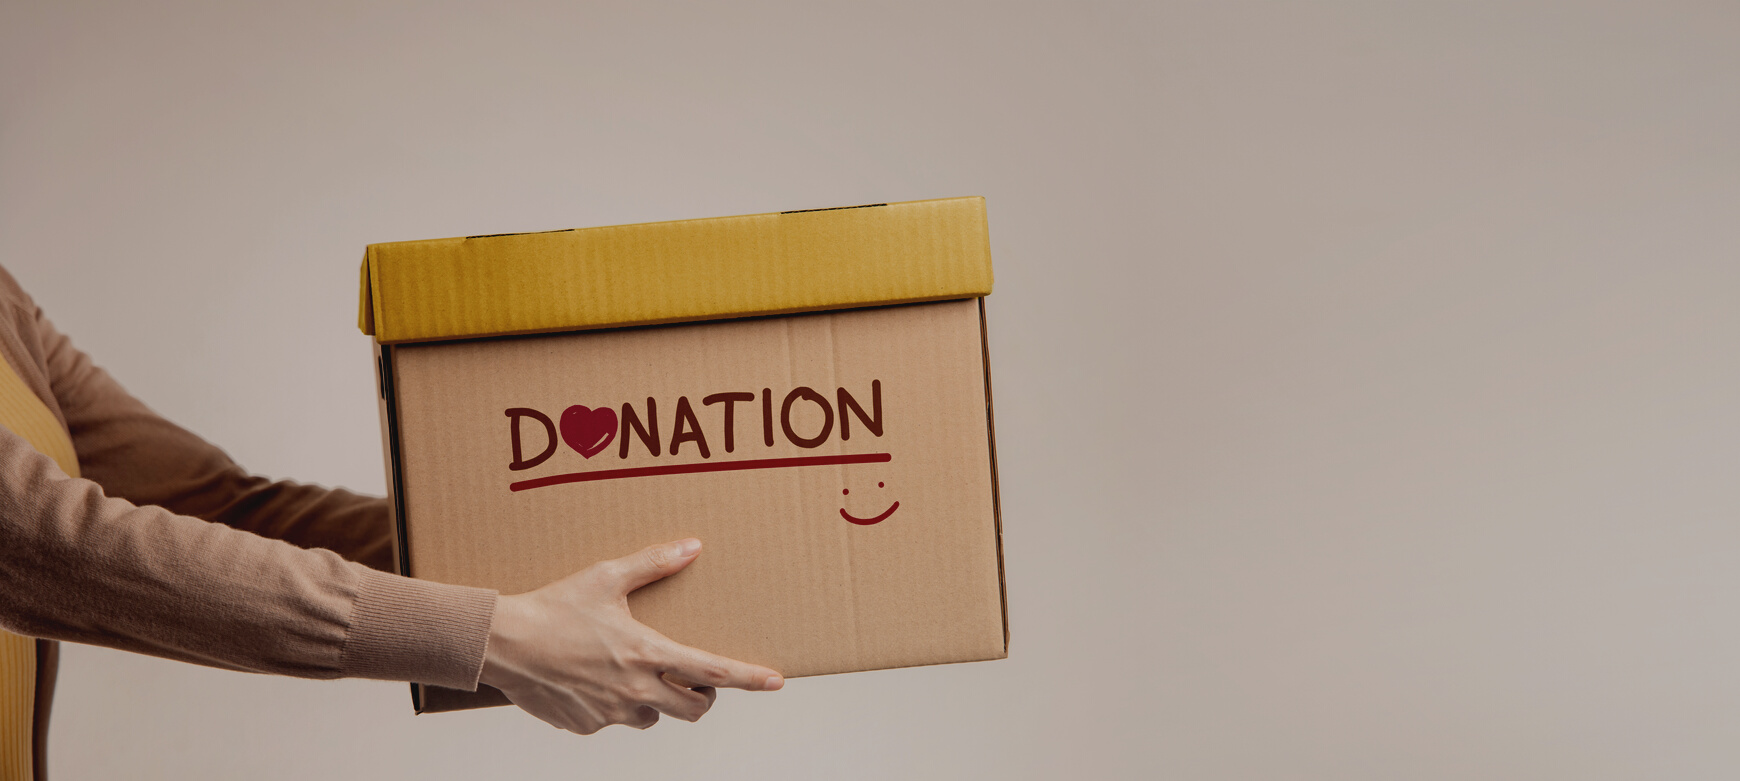 Donation Concept. Woman Giving Box of Donate with Donation